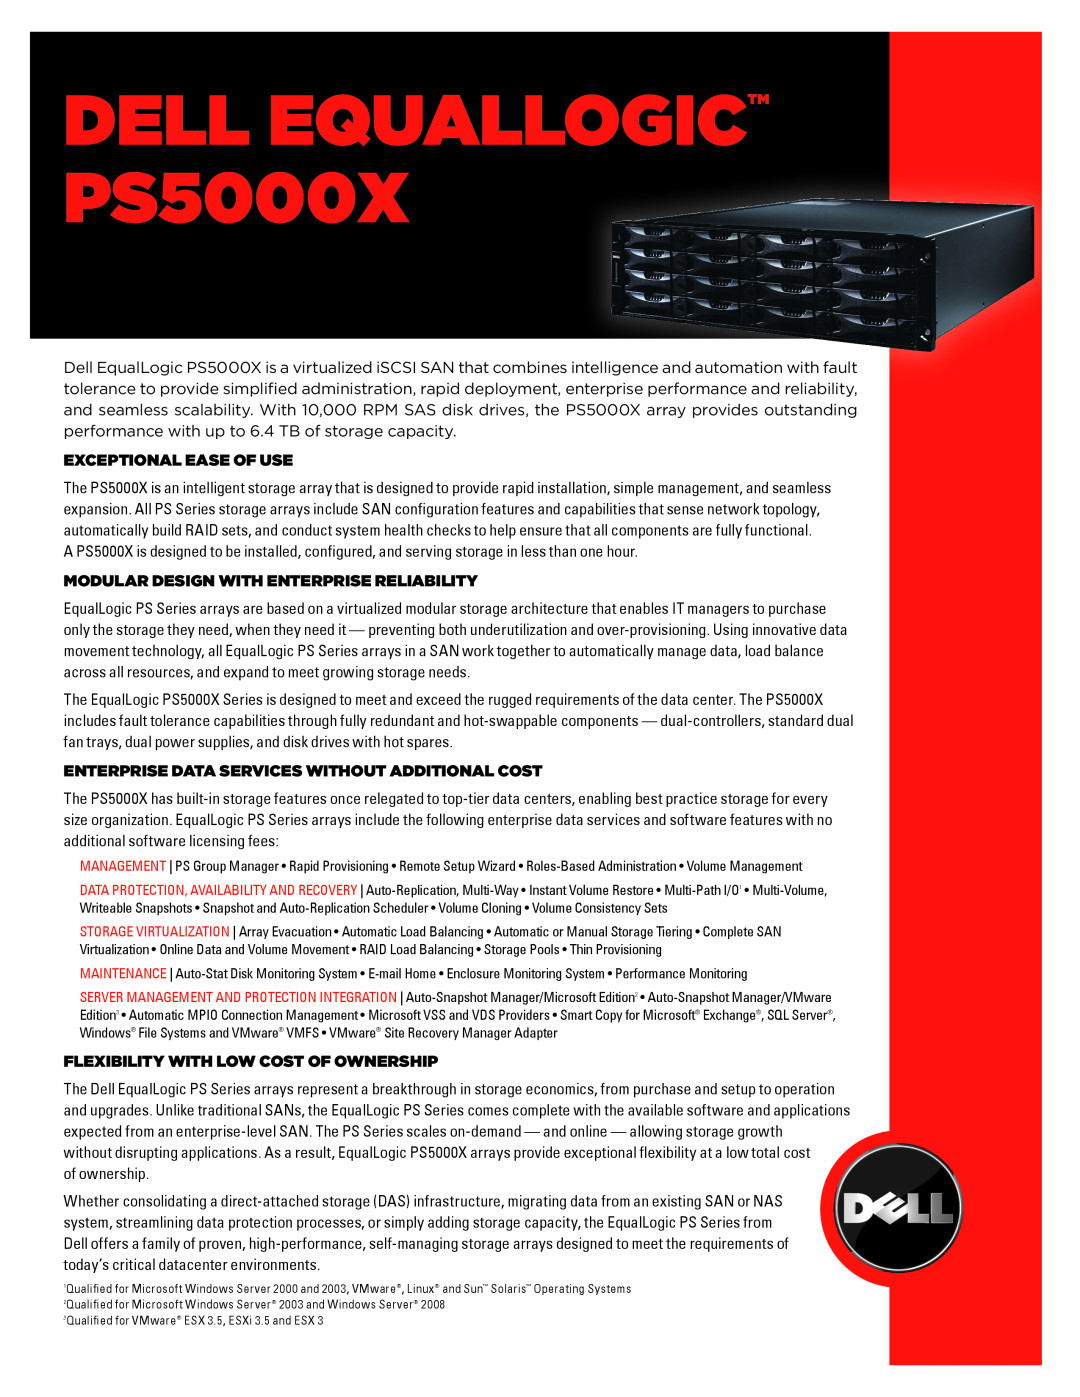 Dell manual Exceptional Ease Of Use, Modular Design With Enterprise Reliability, DELL EQUALLOGIC PS5000X 